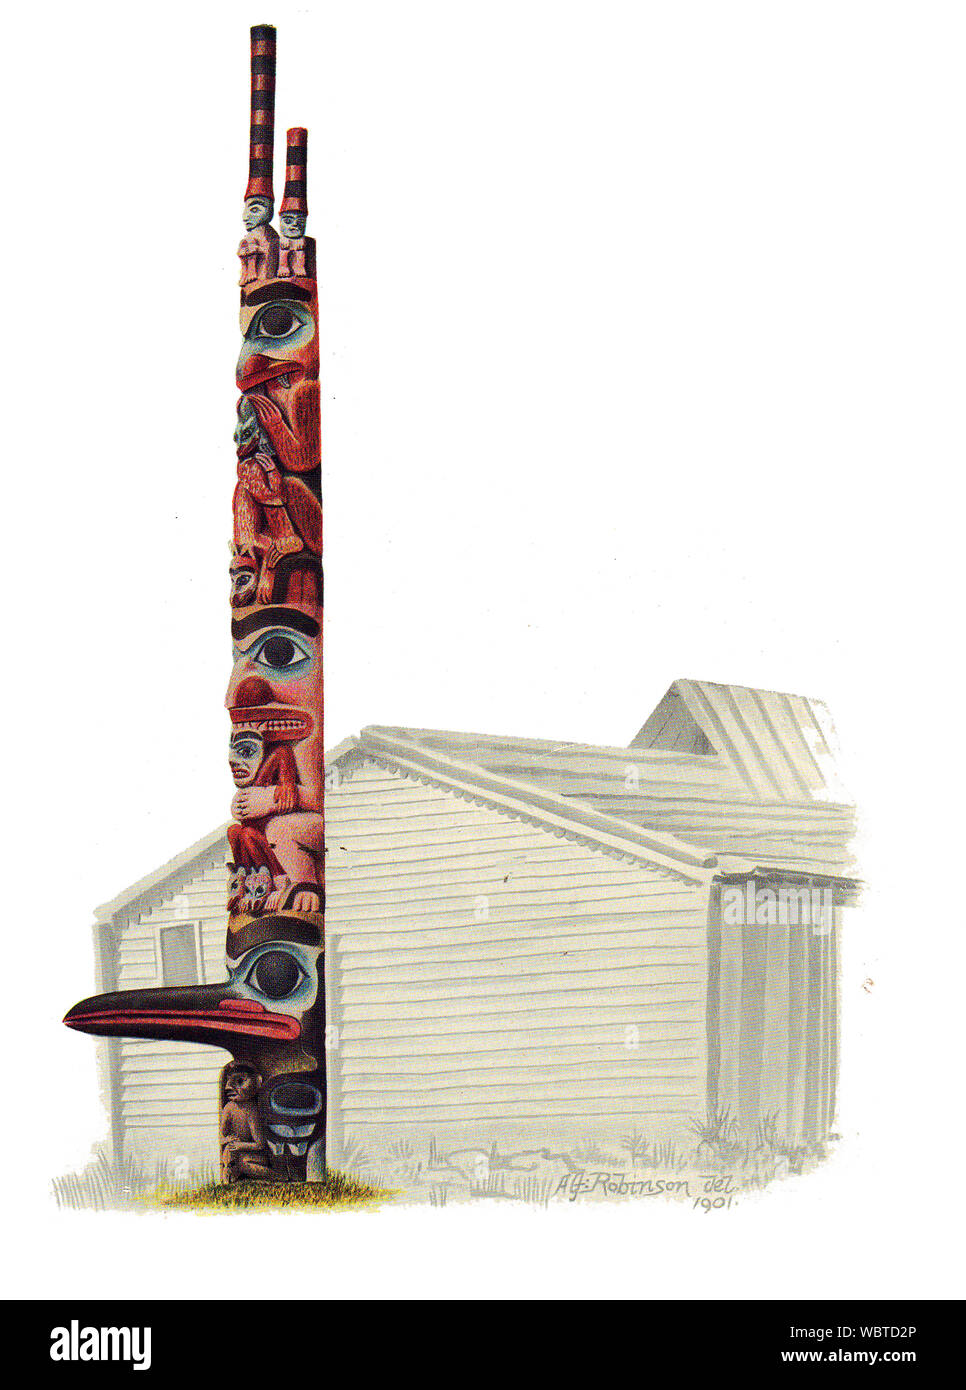 Canadian Indian 40 ft totem pole  that once stood outside a Chief's hut at what was then Queen Charlotte Islands ( now Haida Gwaii, X̱aaydag̱a Gwaay.yaay or X̱aayda gwaay ) Stock Photo